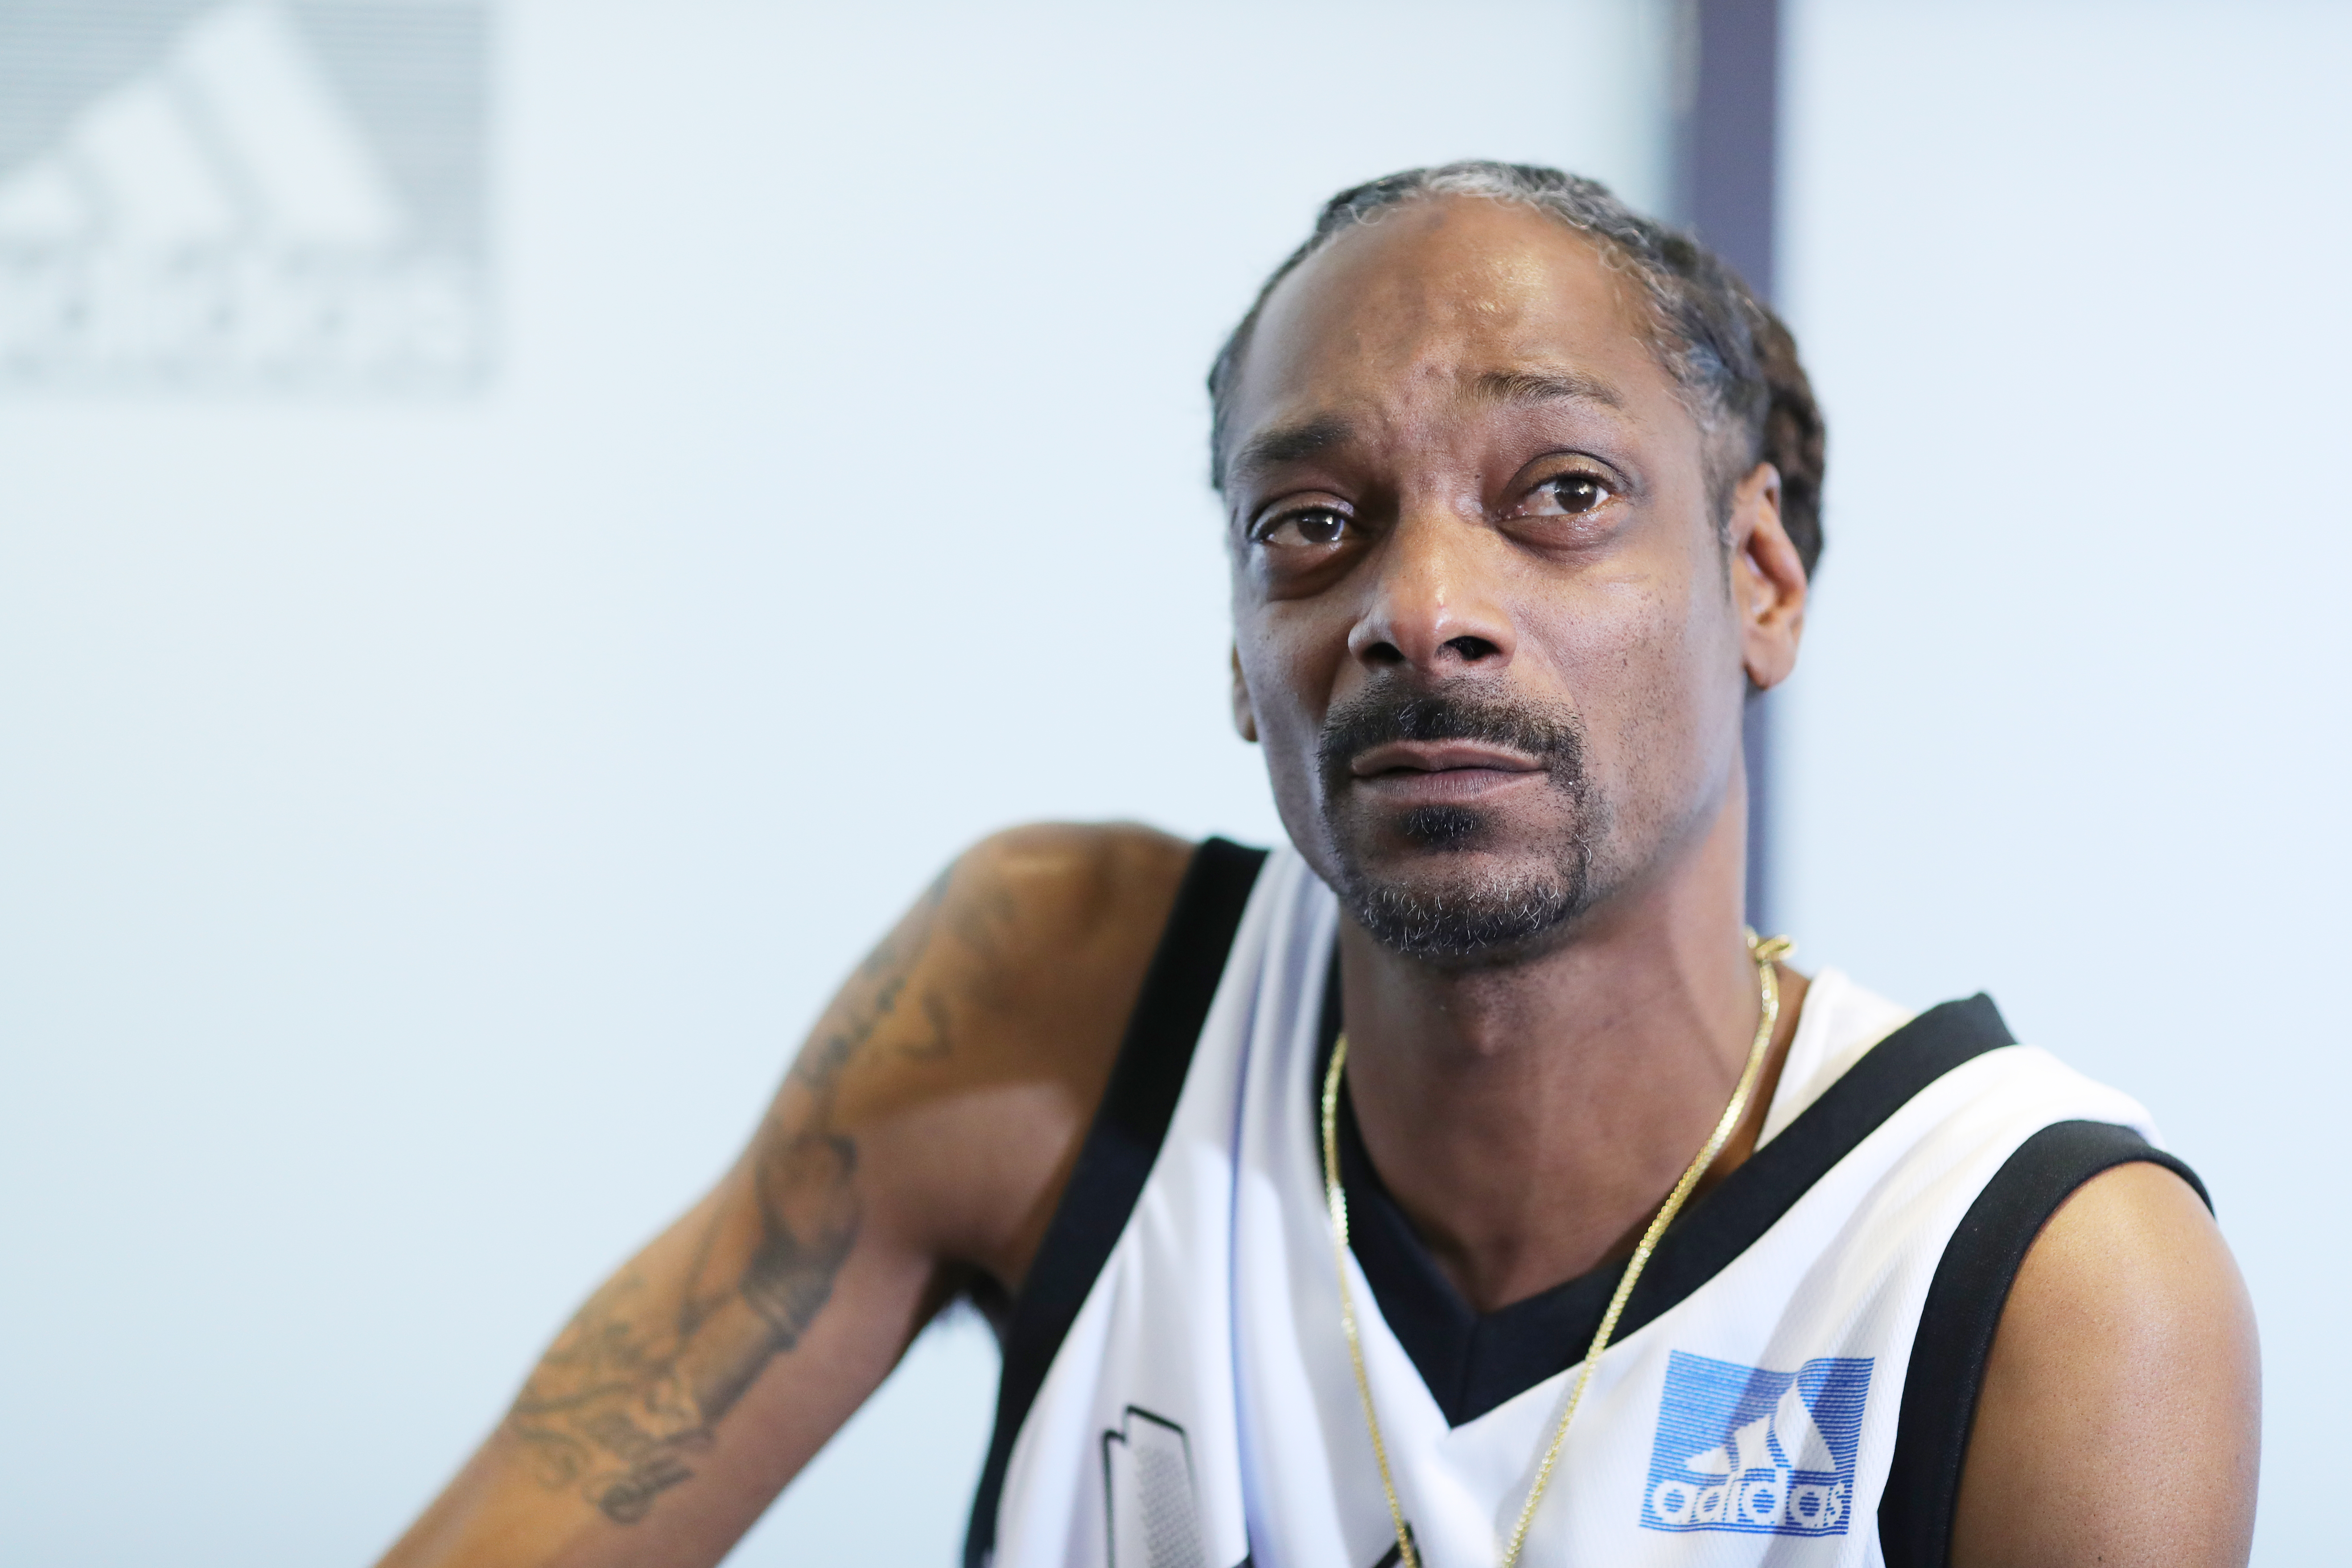 Snoop Dogg speaks during a press conference at Adidas Creates 747 Warehouse St., an event in basketball culture, in Los Angeles, California, on February 16, 2018. | Source: Getty Images